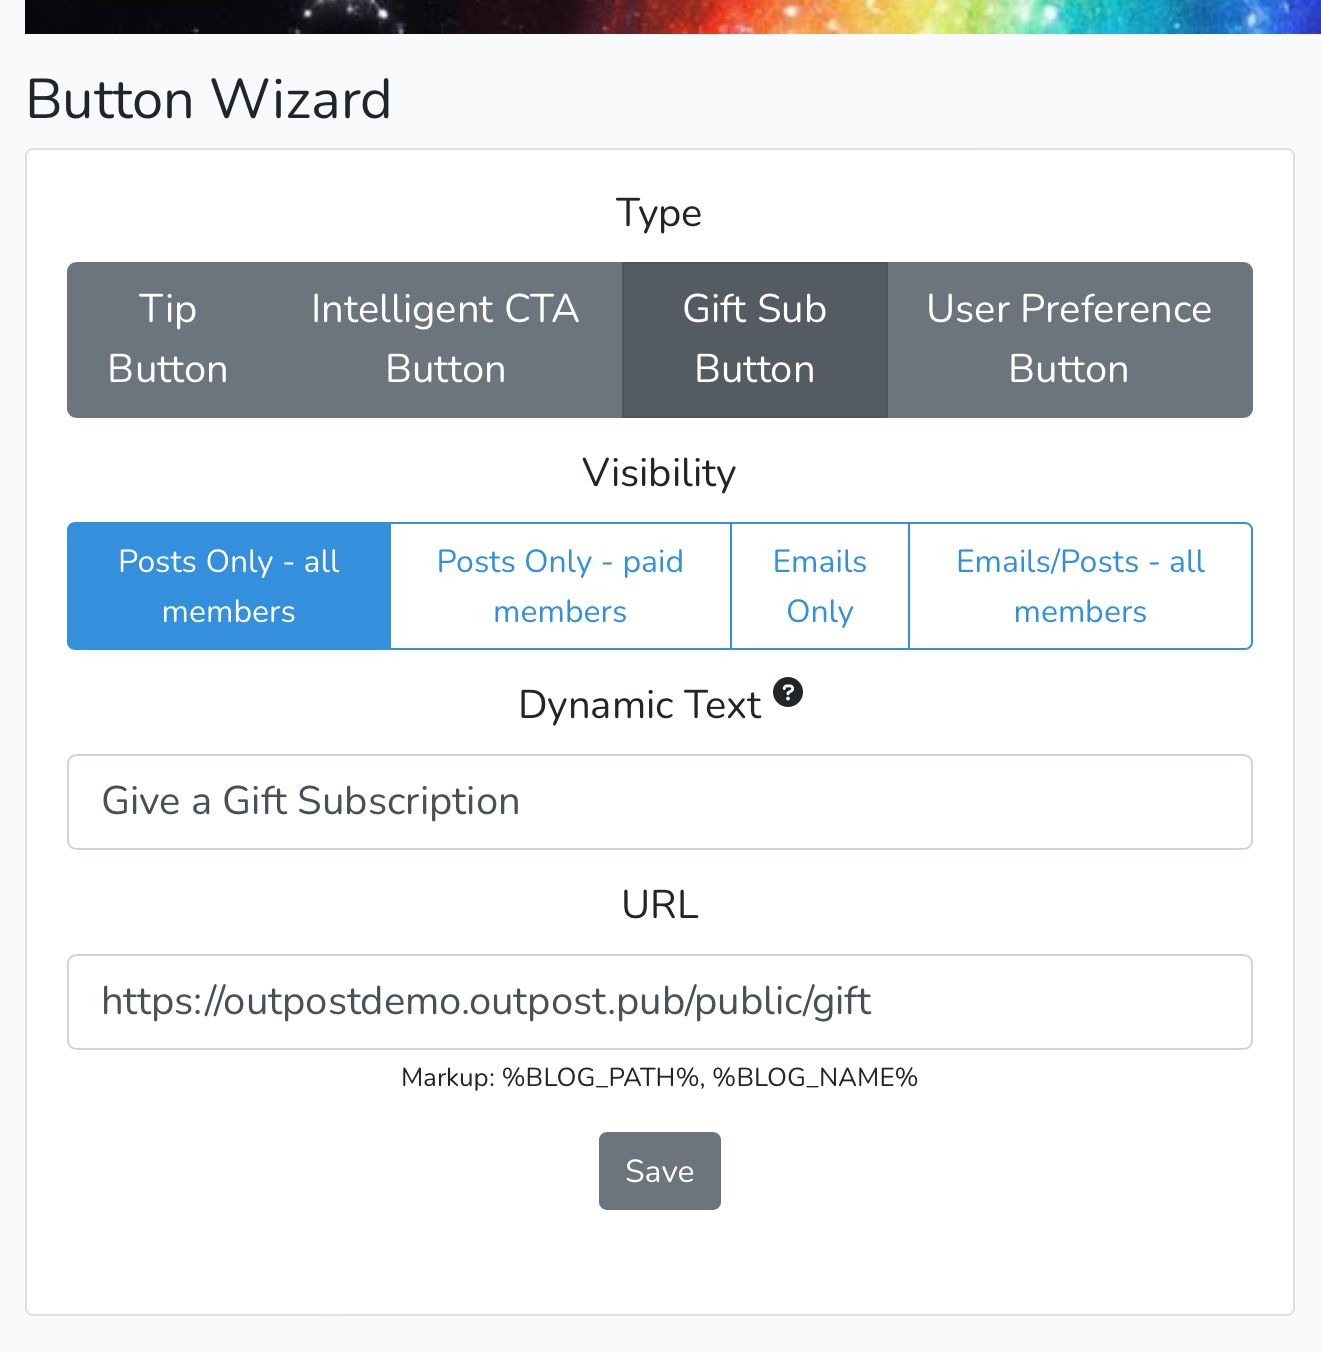 Screenshot of Gift Subscription Button Wizard in Outpost